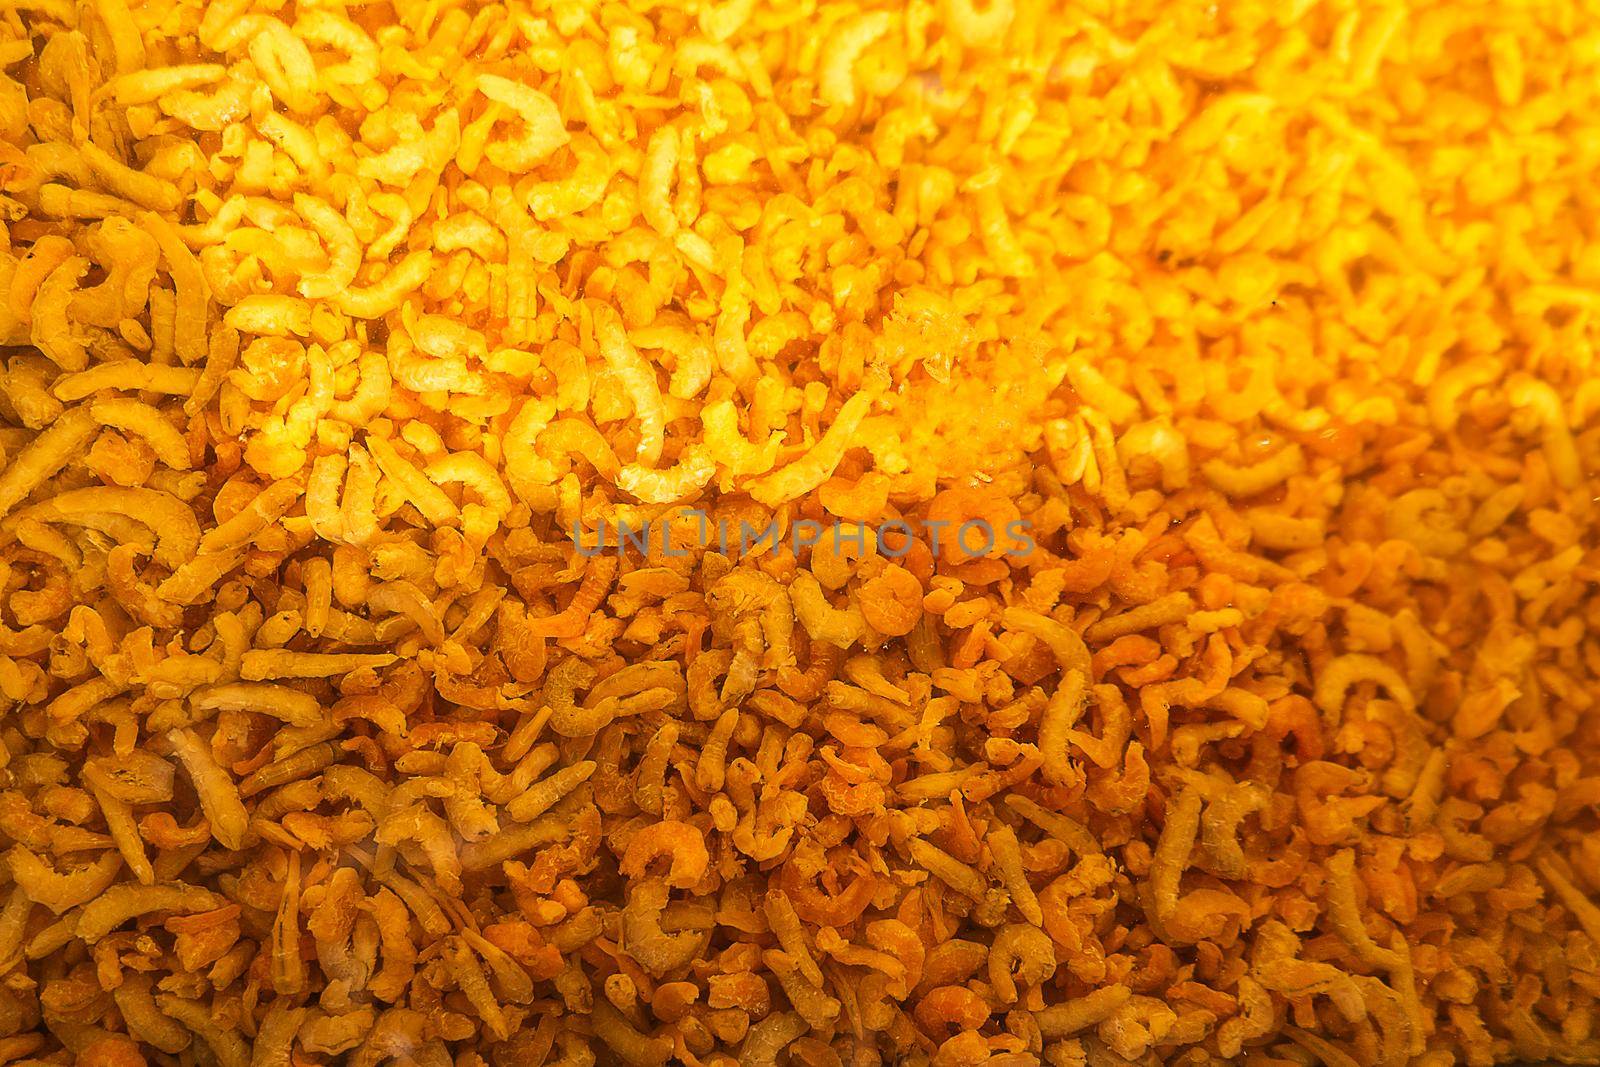 Wallpaper style photo of soaked dried shrimp. Seafood that is used as ingredients for Easter meals in Central and Latin America.